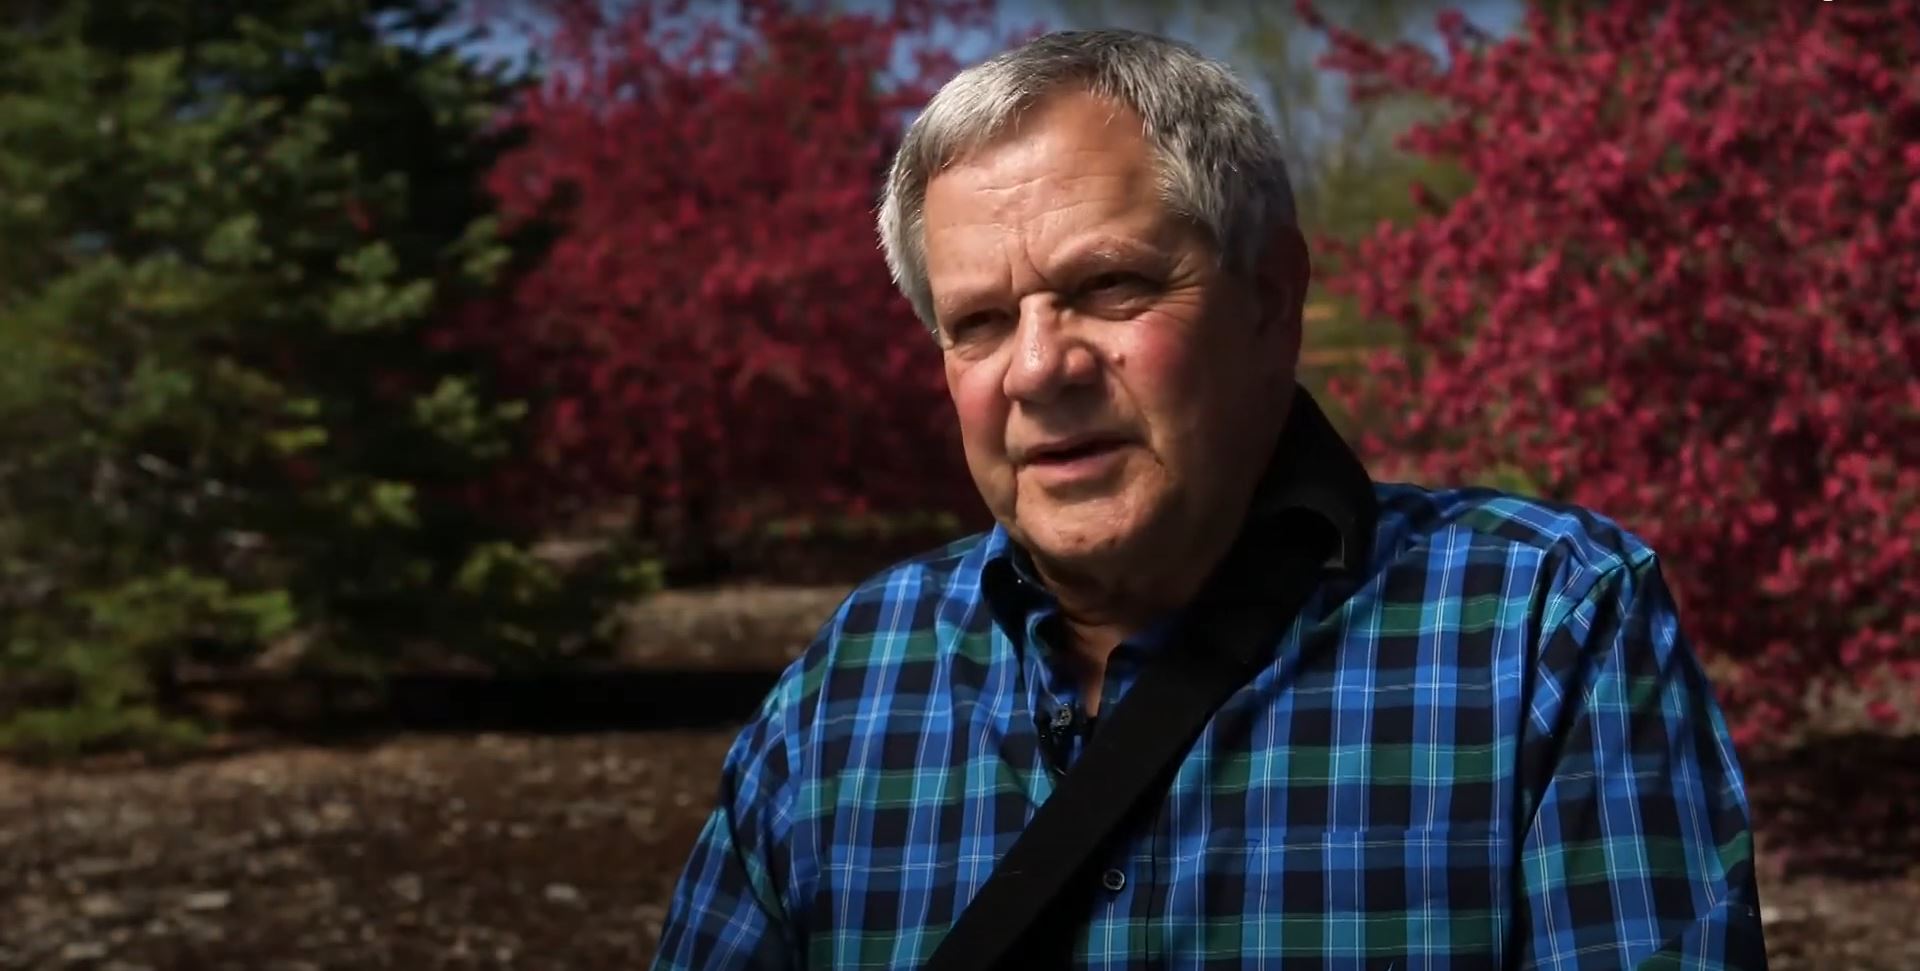 Dean Story discusses his care at Presbyterian/St. Luke's Medical Center while sitting in a garden.